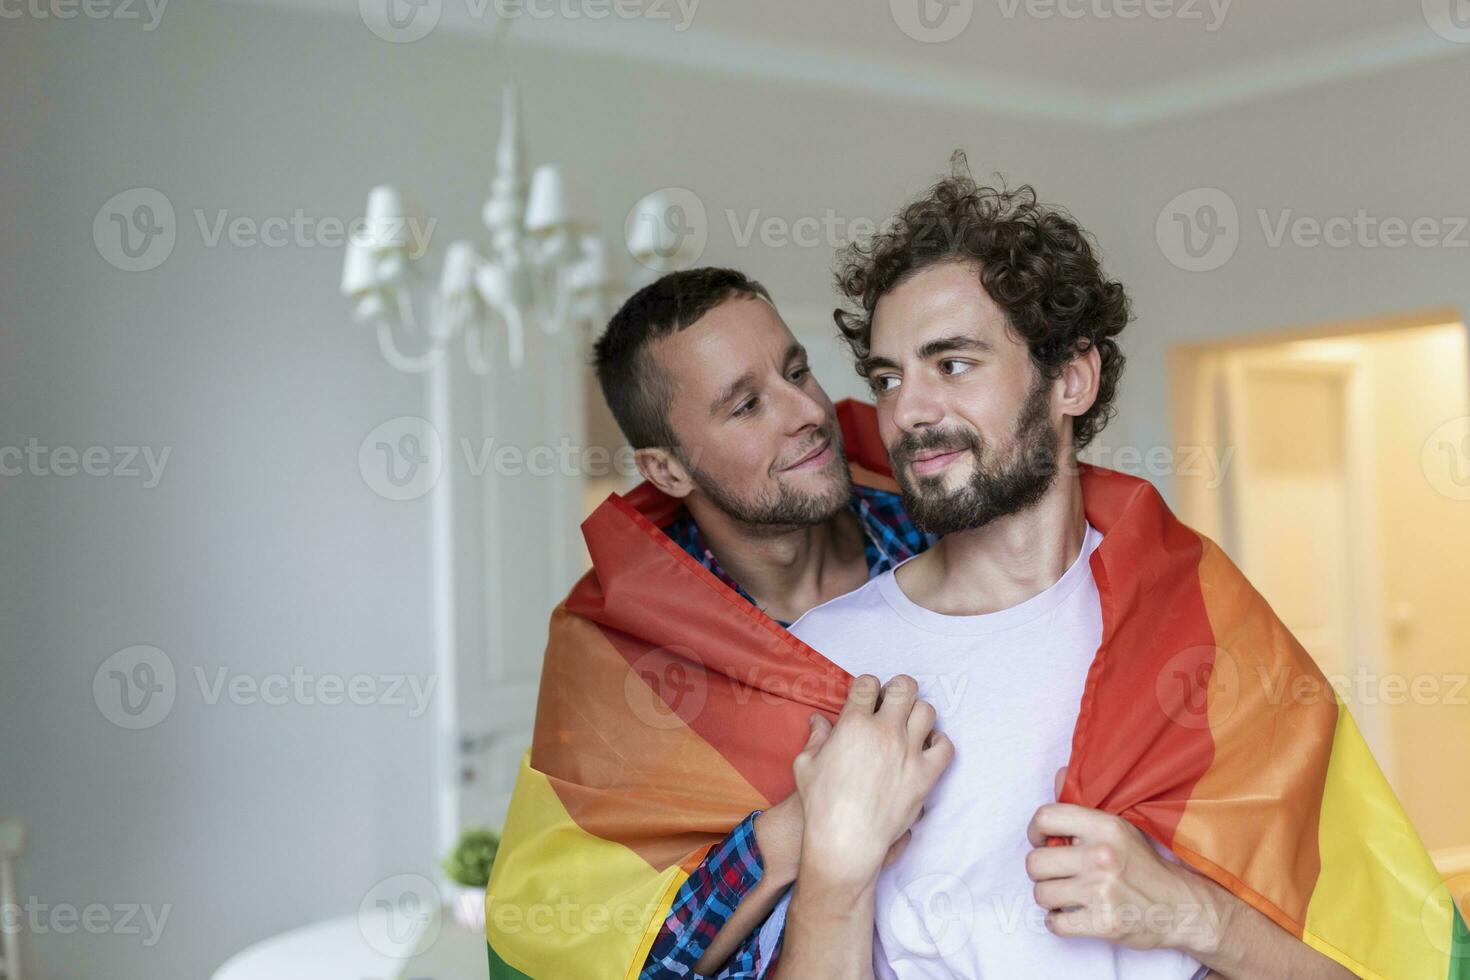 Affectionate Male gay couple indoors. Man embracing his boyfriend from behind at home. Gay couple celebrating pride month photo